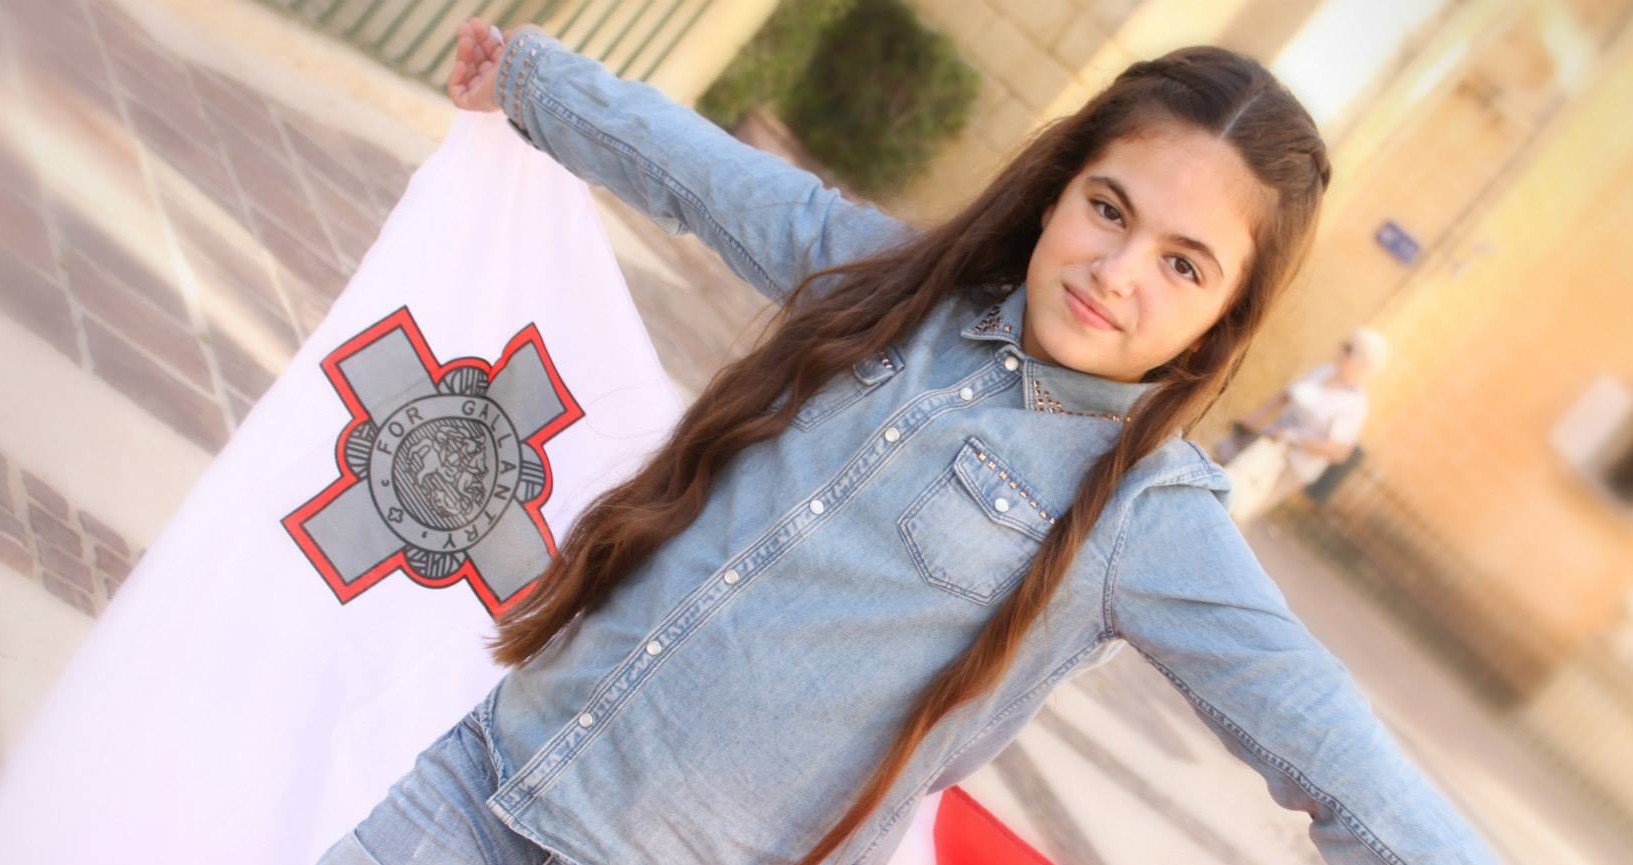 Malta most likely to host Junior Eurovision 2014